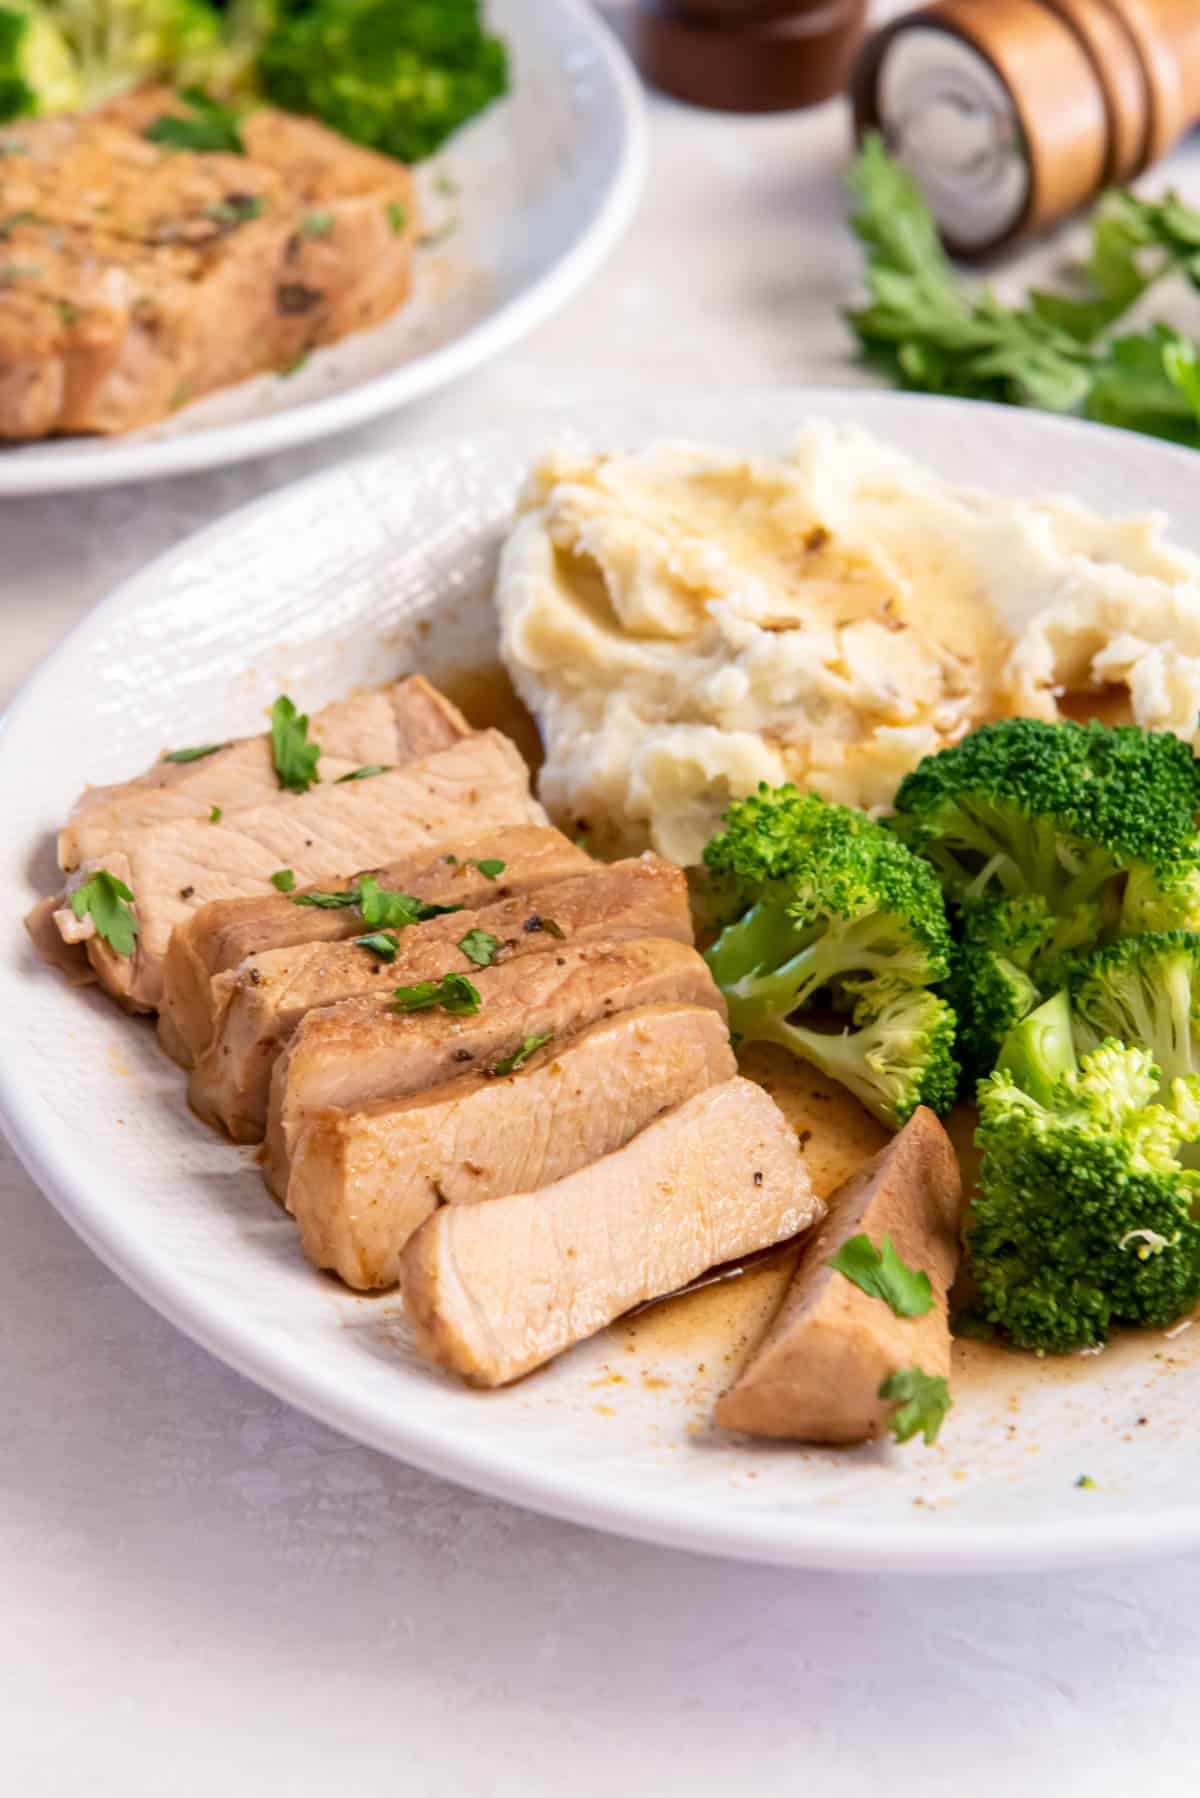 A cooked pork chop sliced into many pieces and served on a plate with cooked broccoli and mashed potatoes.